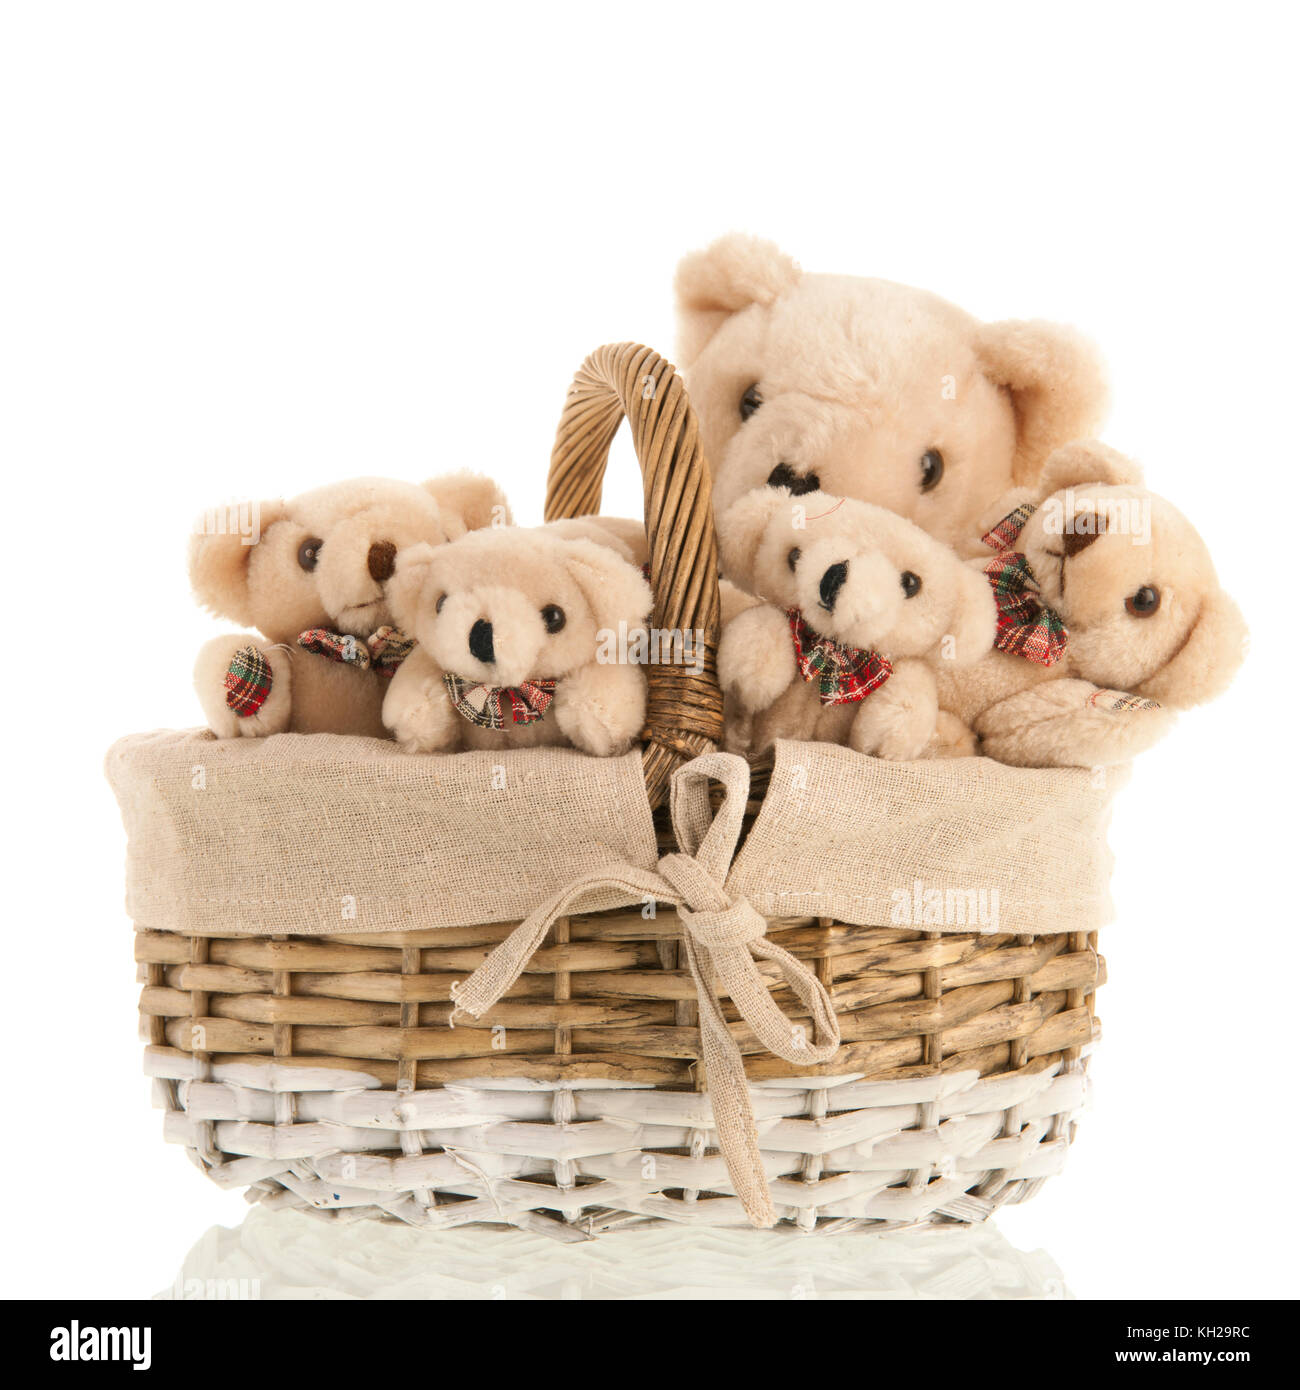 Group stuffed bears together in wicker basket isolated over white background Stock Photo